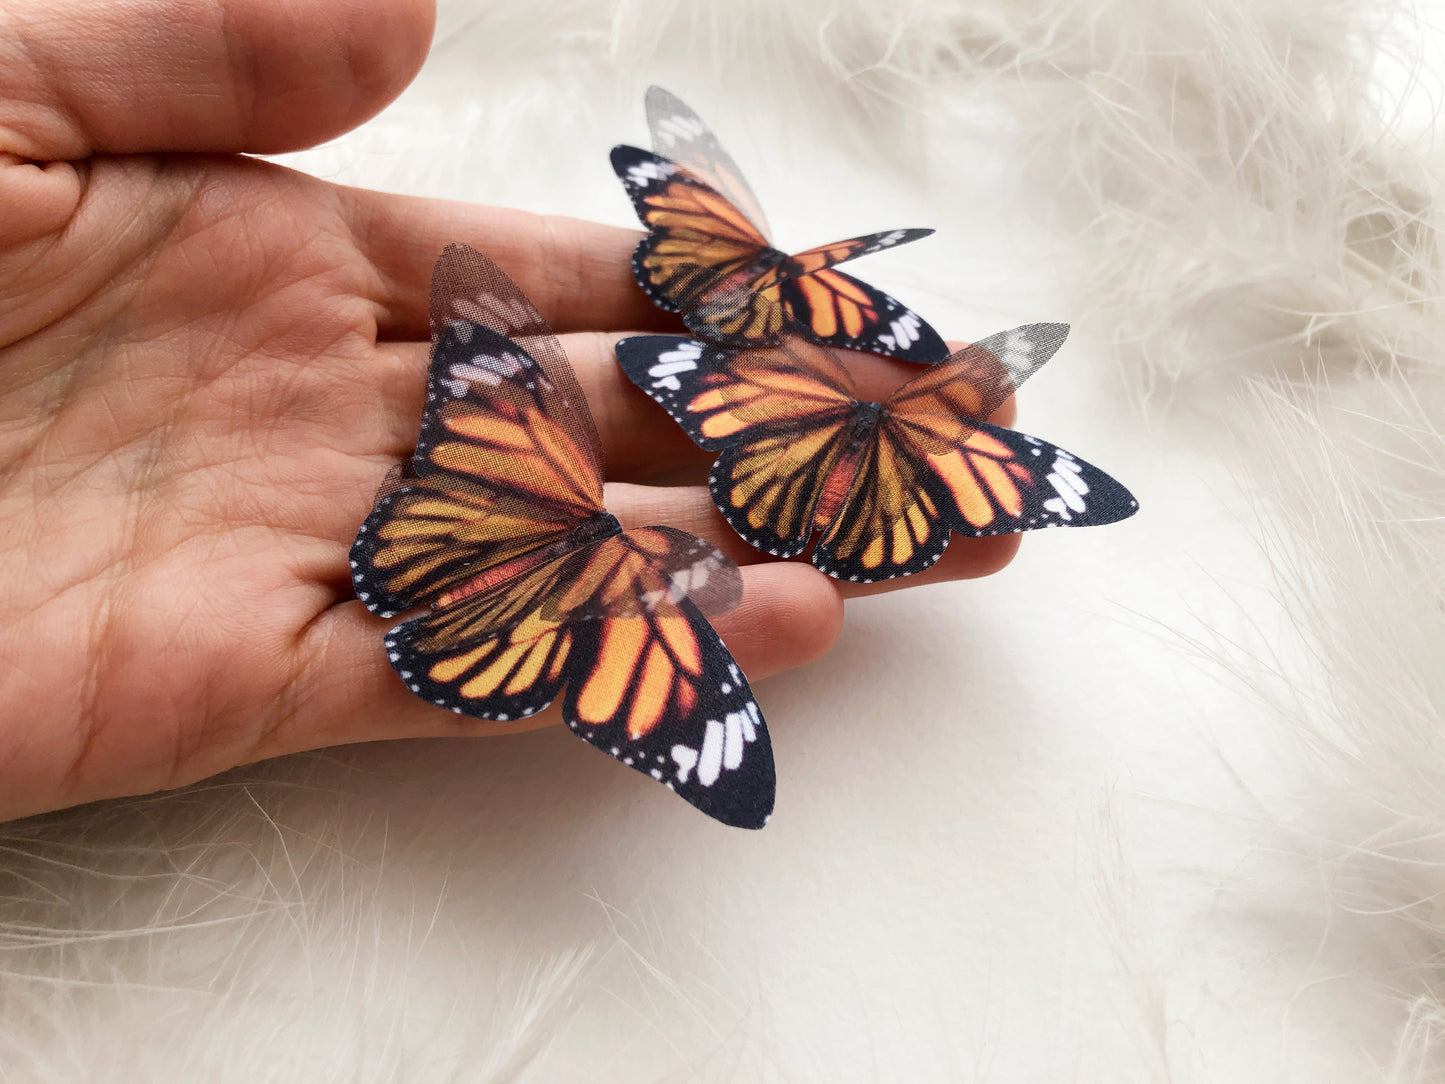 3 Monarch Butterflies on a Hand White Background